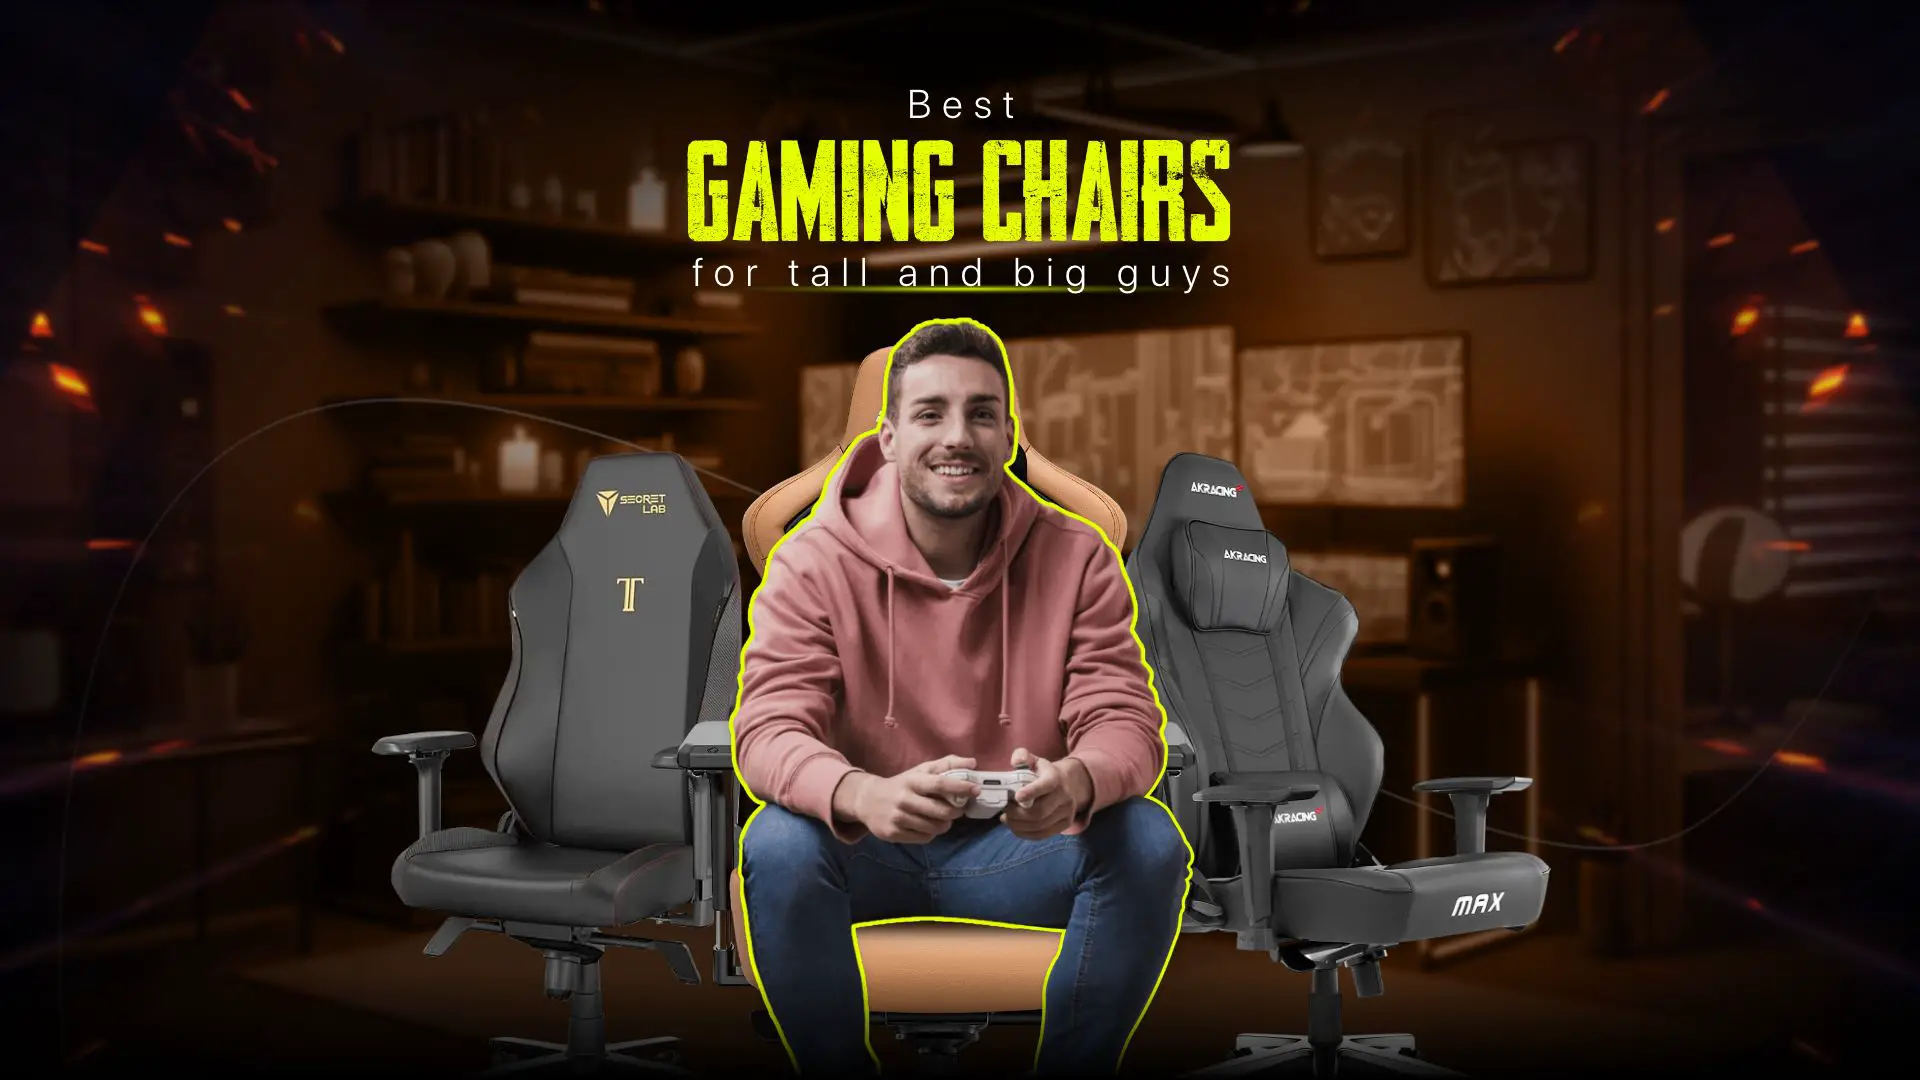 Best gaming chairs for tall and big guys